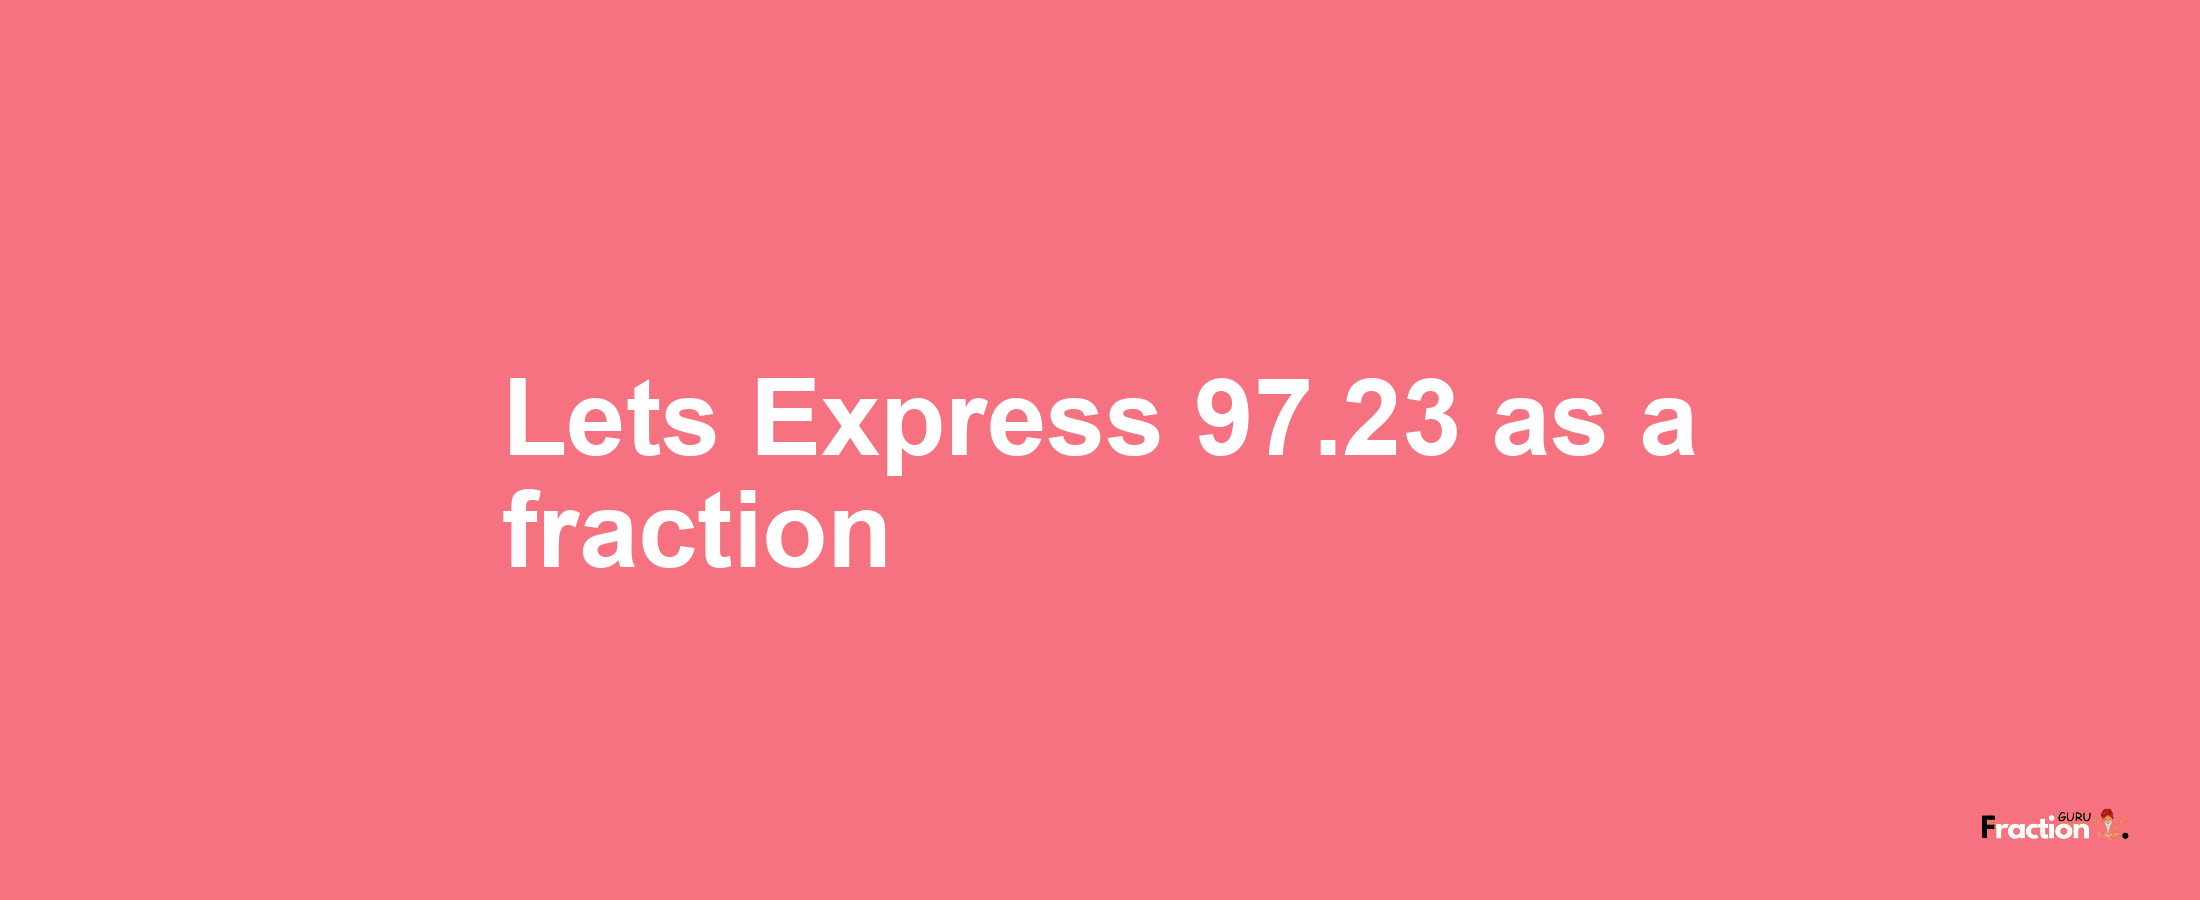 Lets Express 97.23 as afraction